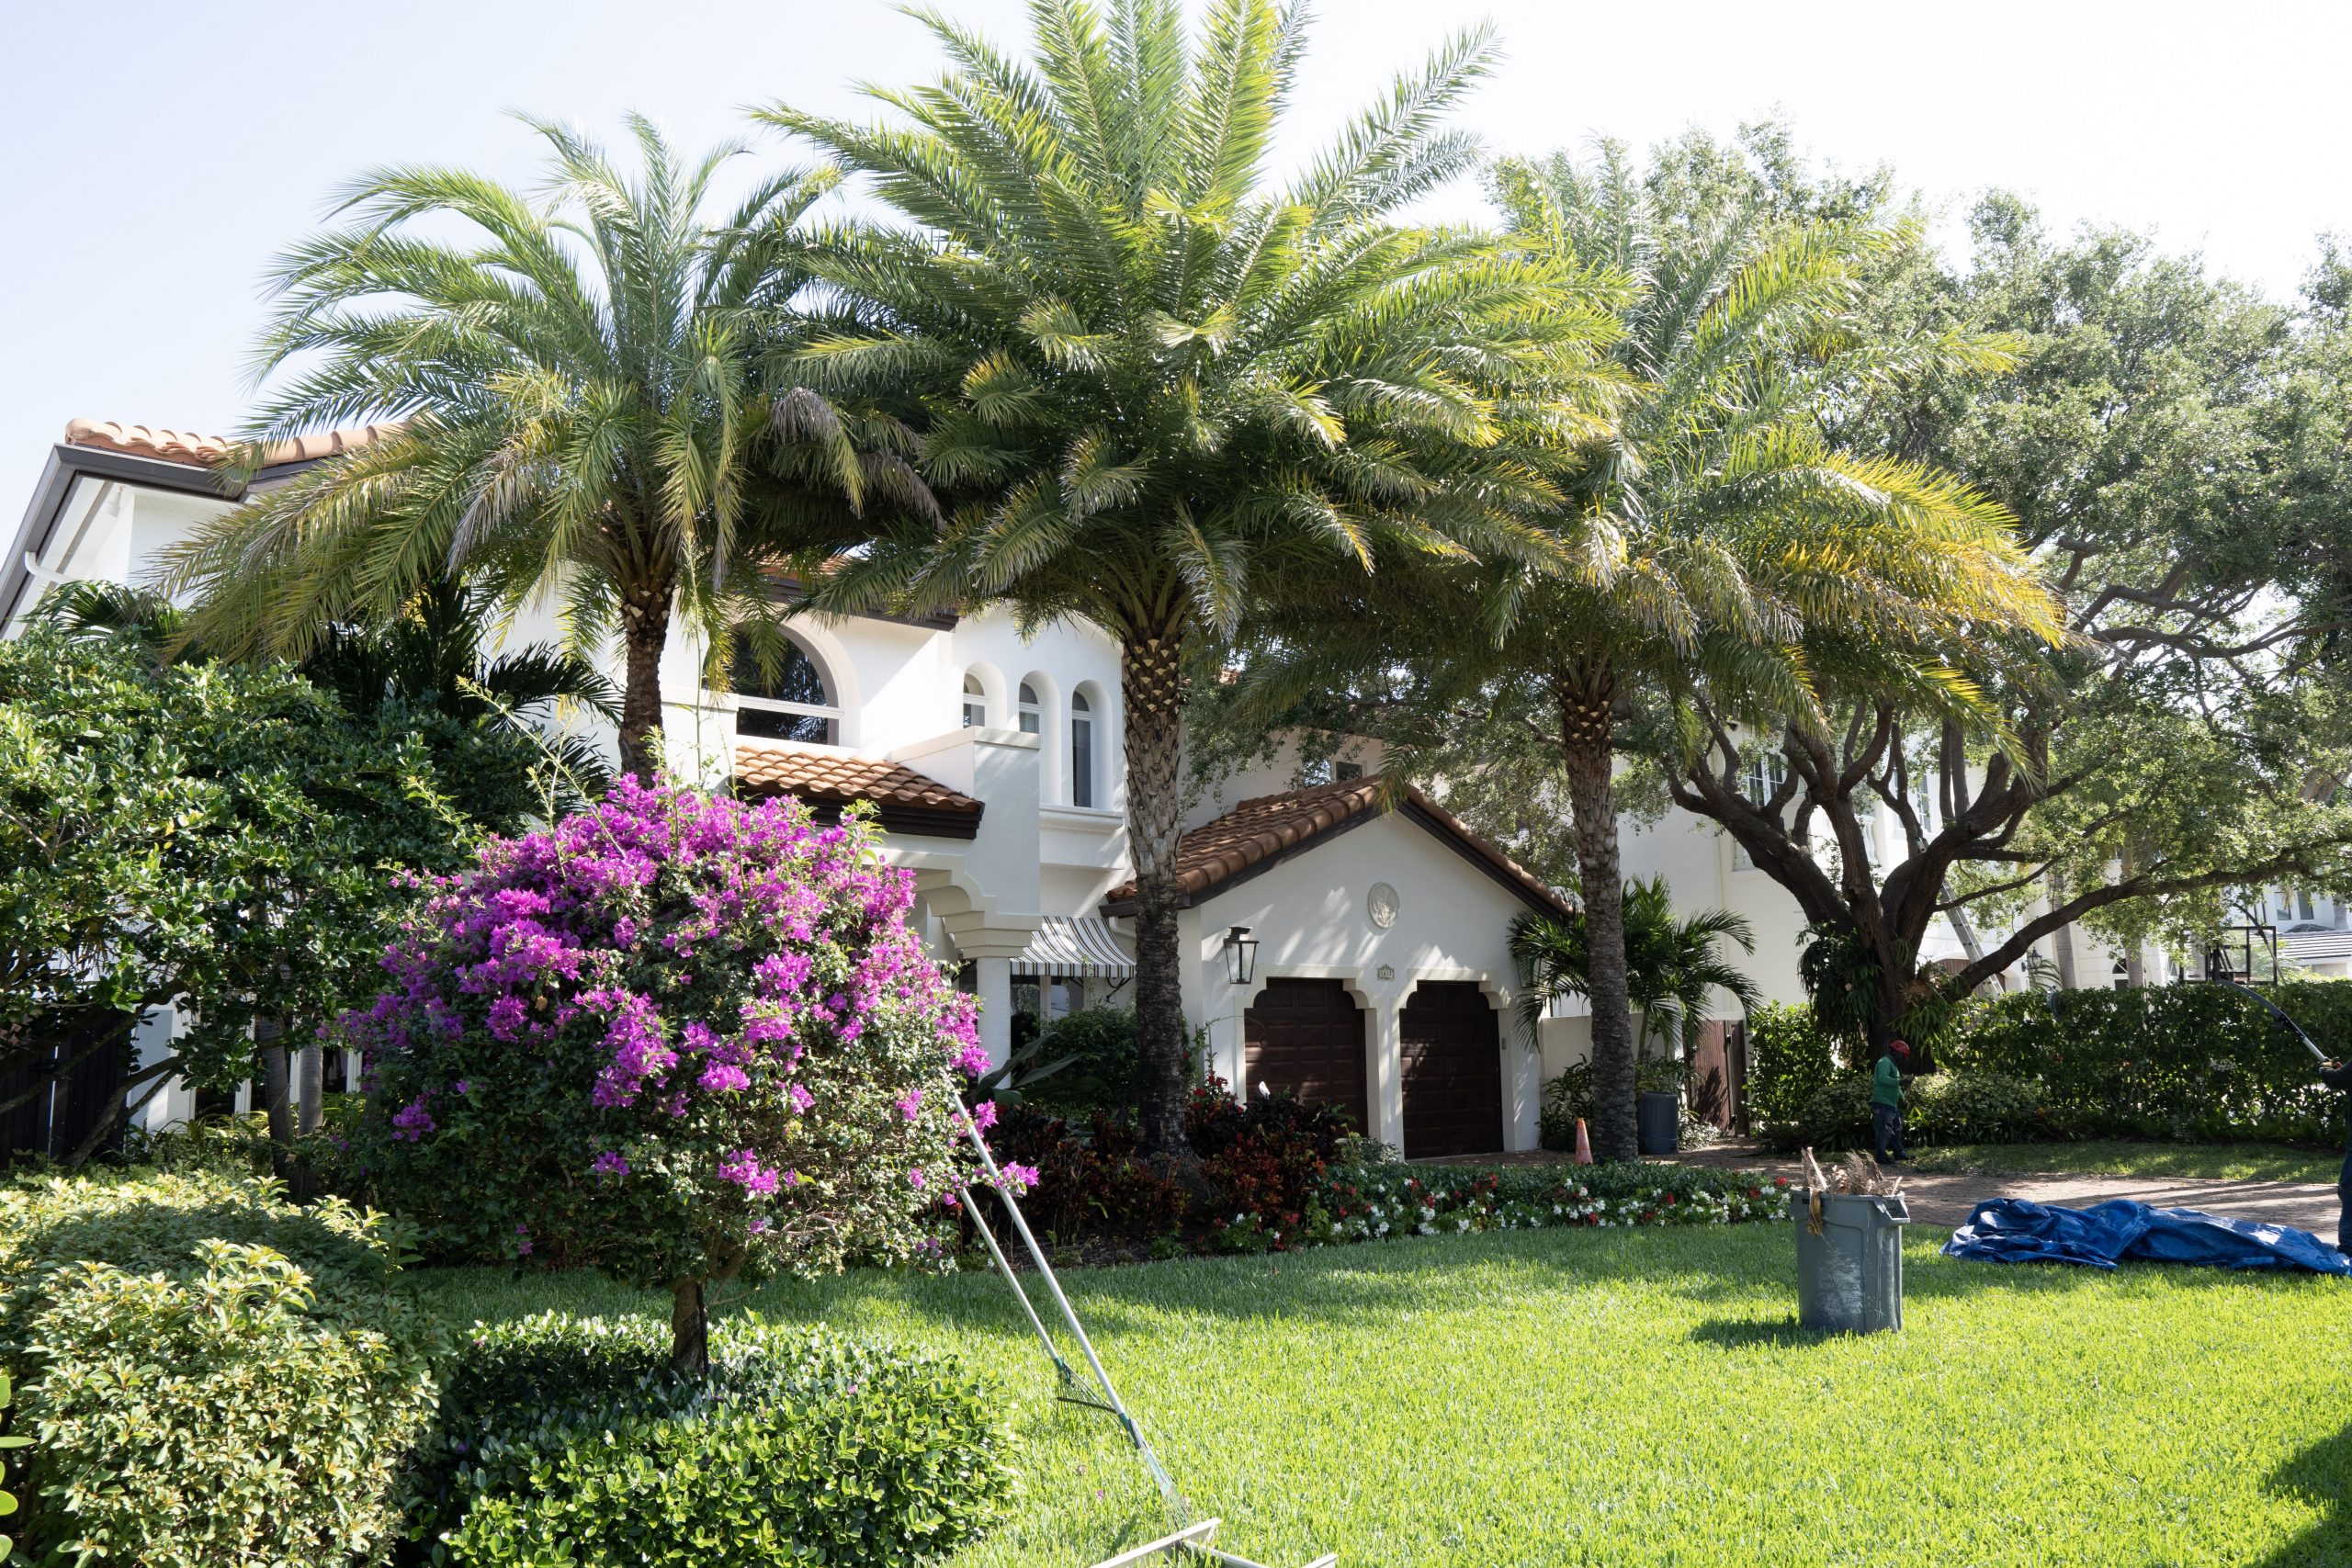 Real Tree Trimming & Landscaping, Inc, a Team of Reliable Tree Service Professionals in Pompano Beach, FL, Offers Free Quotes for each Service